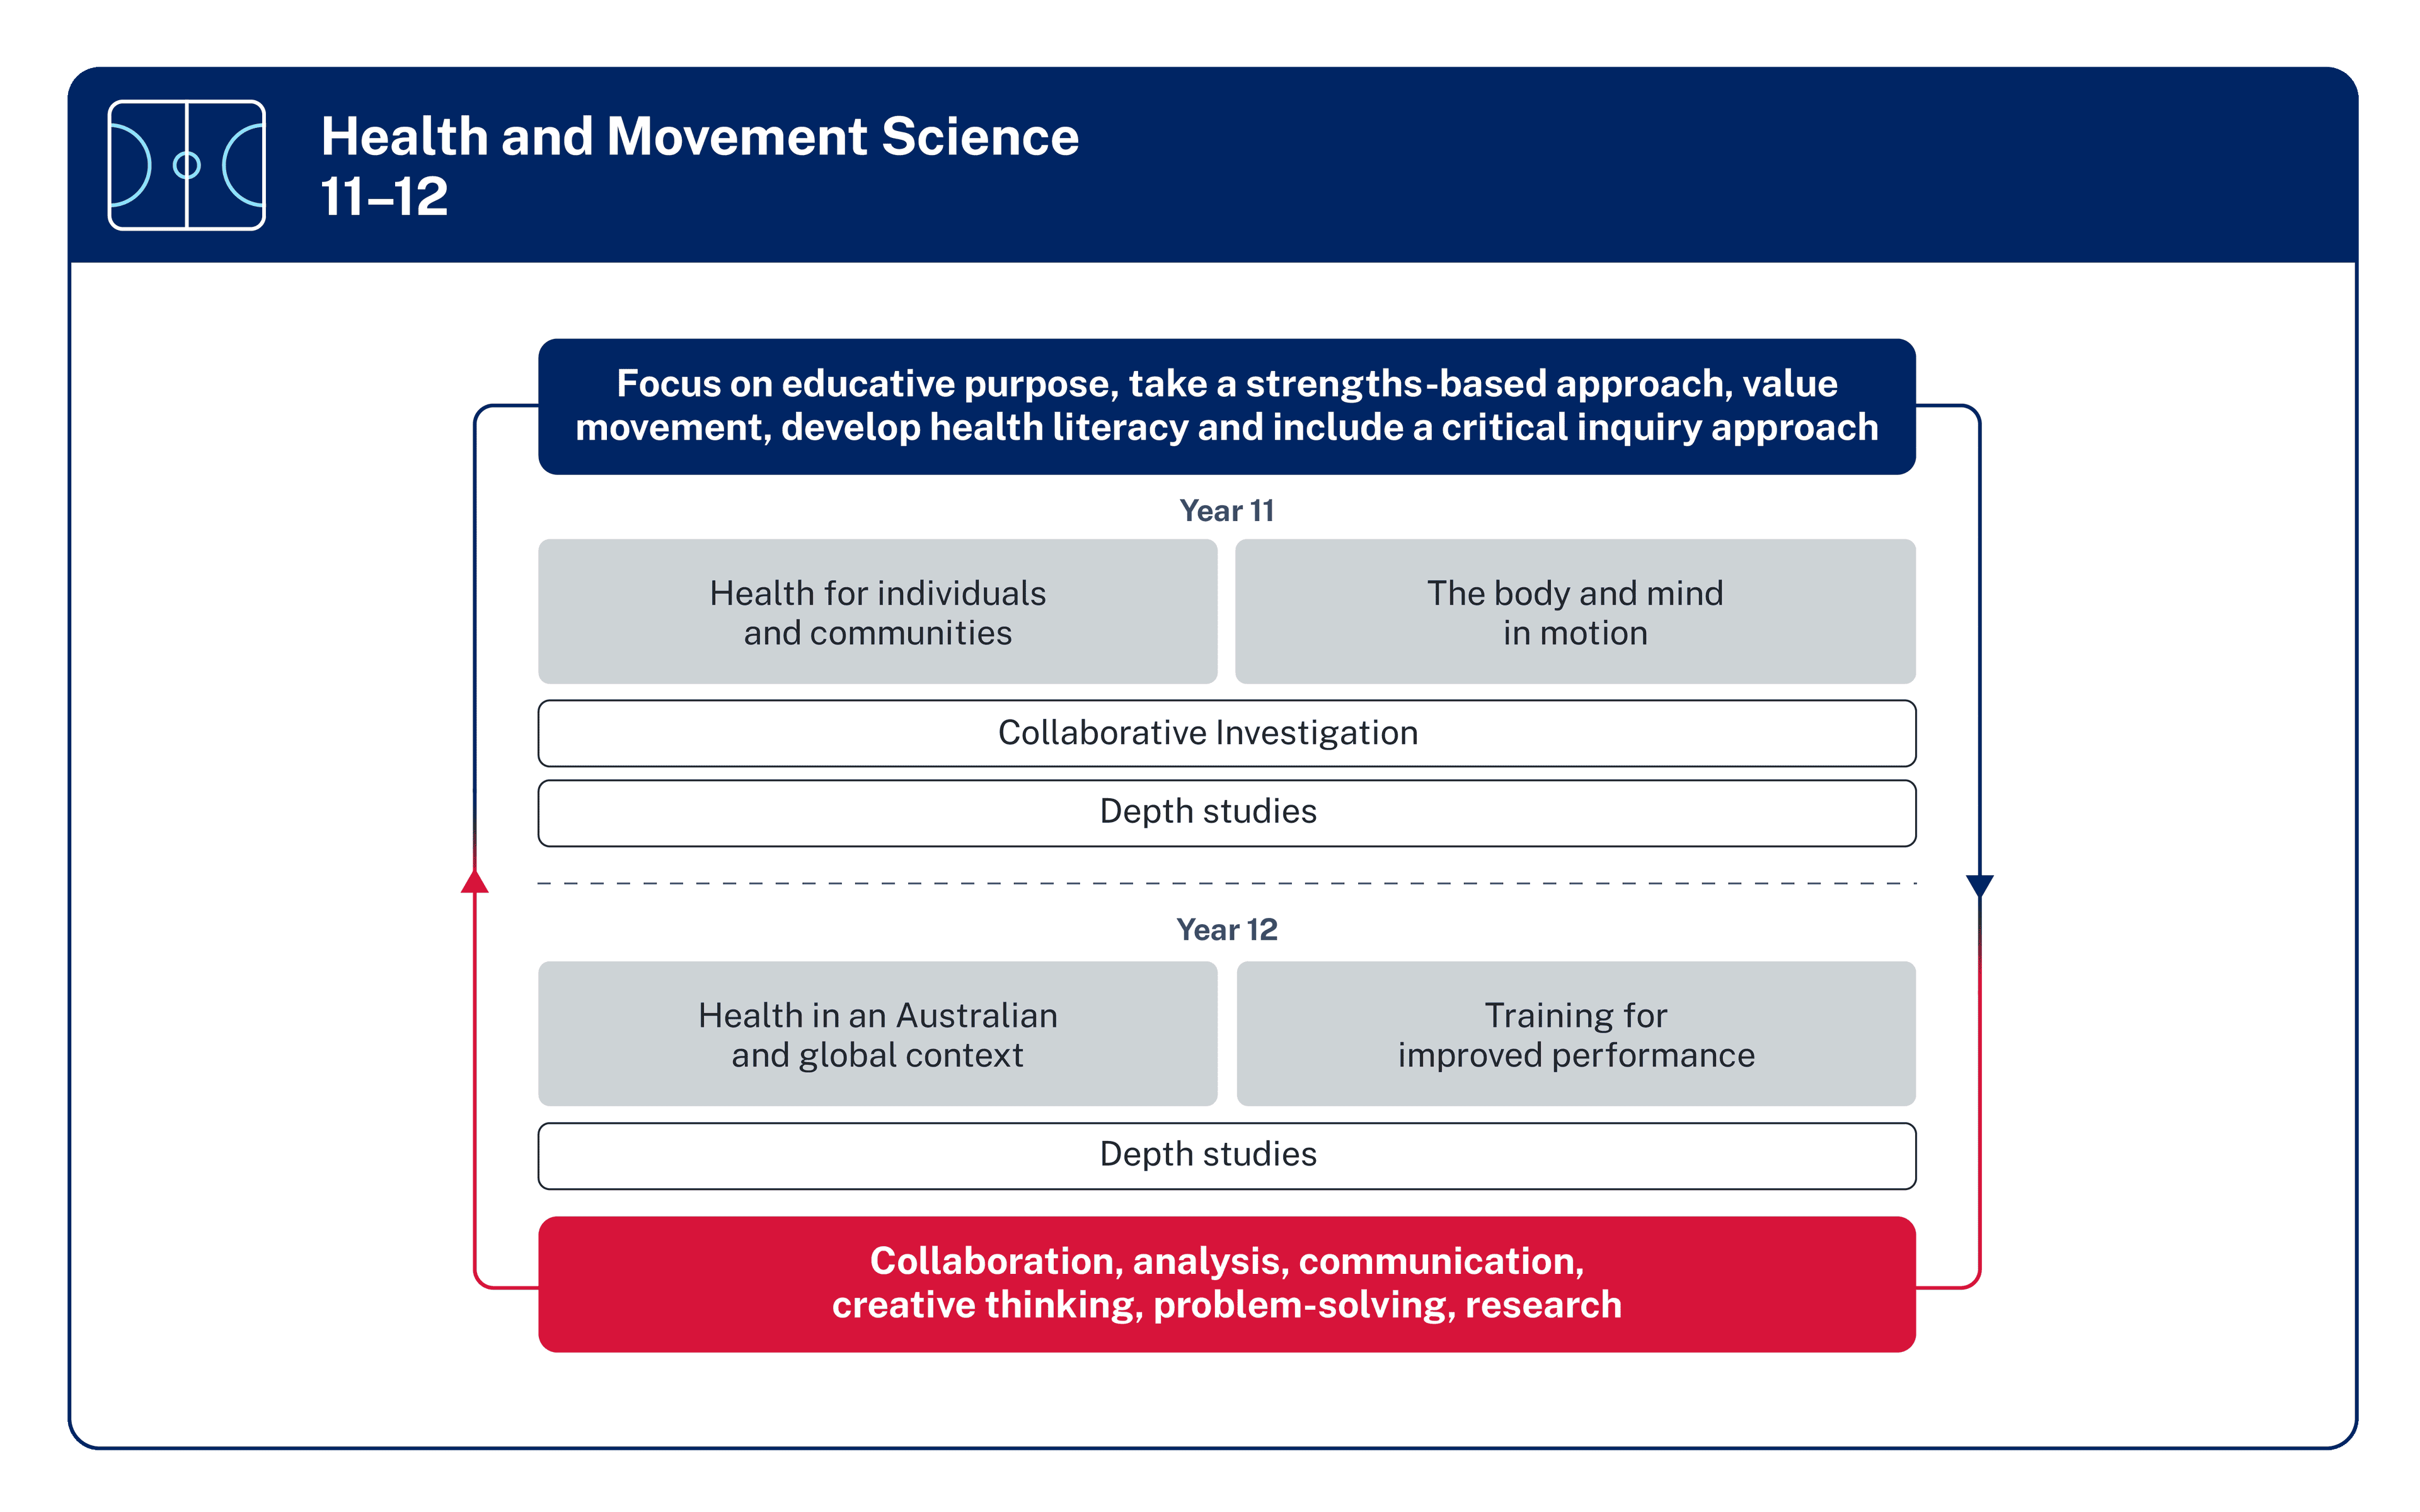 Focus areas and skills for Health and Movement Science. More detail in text below diagram.